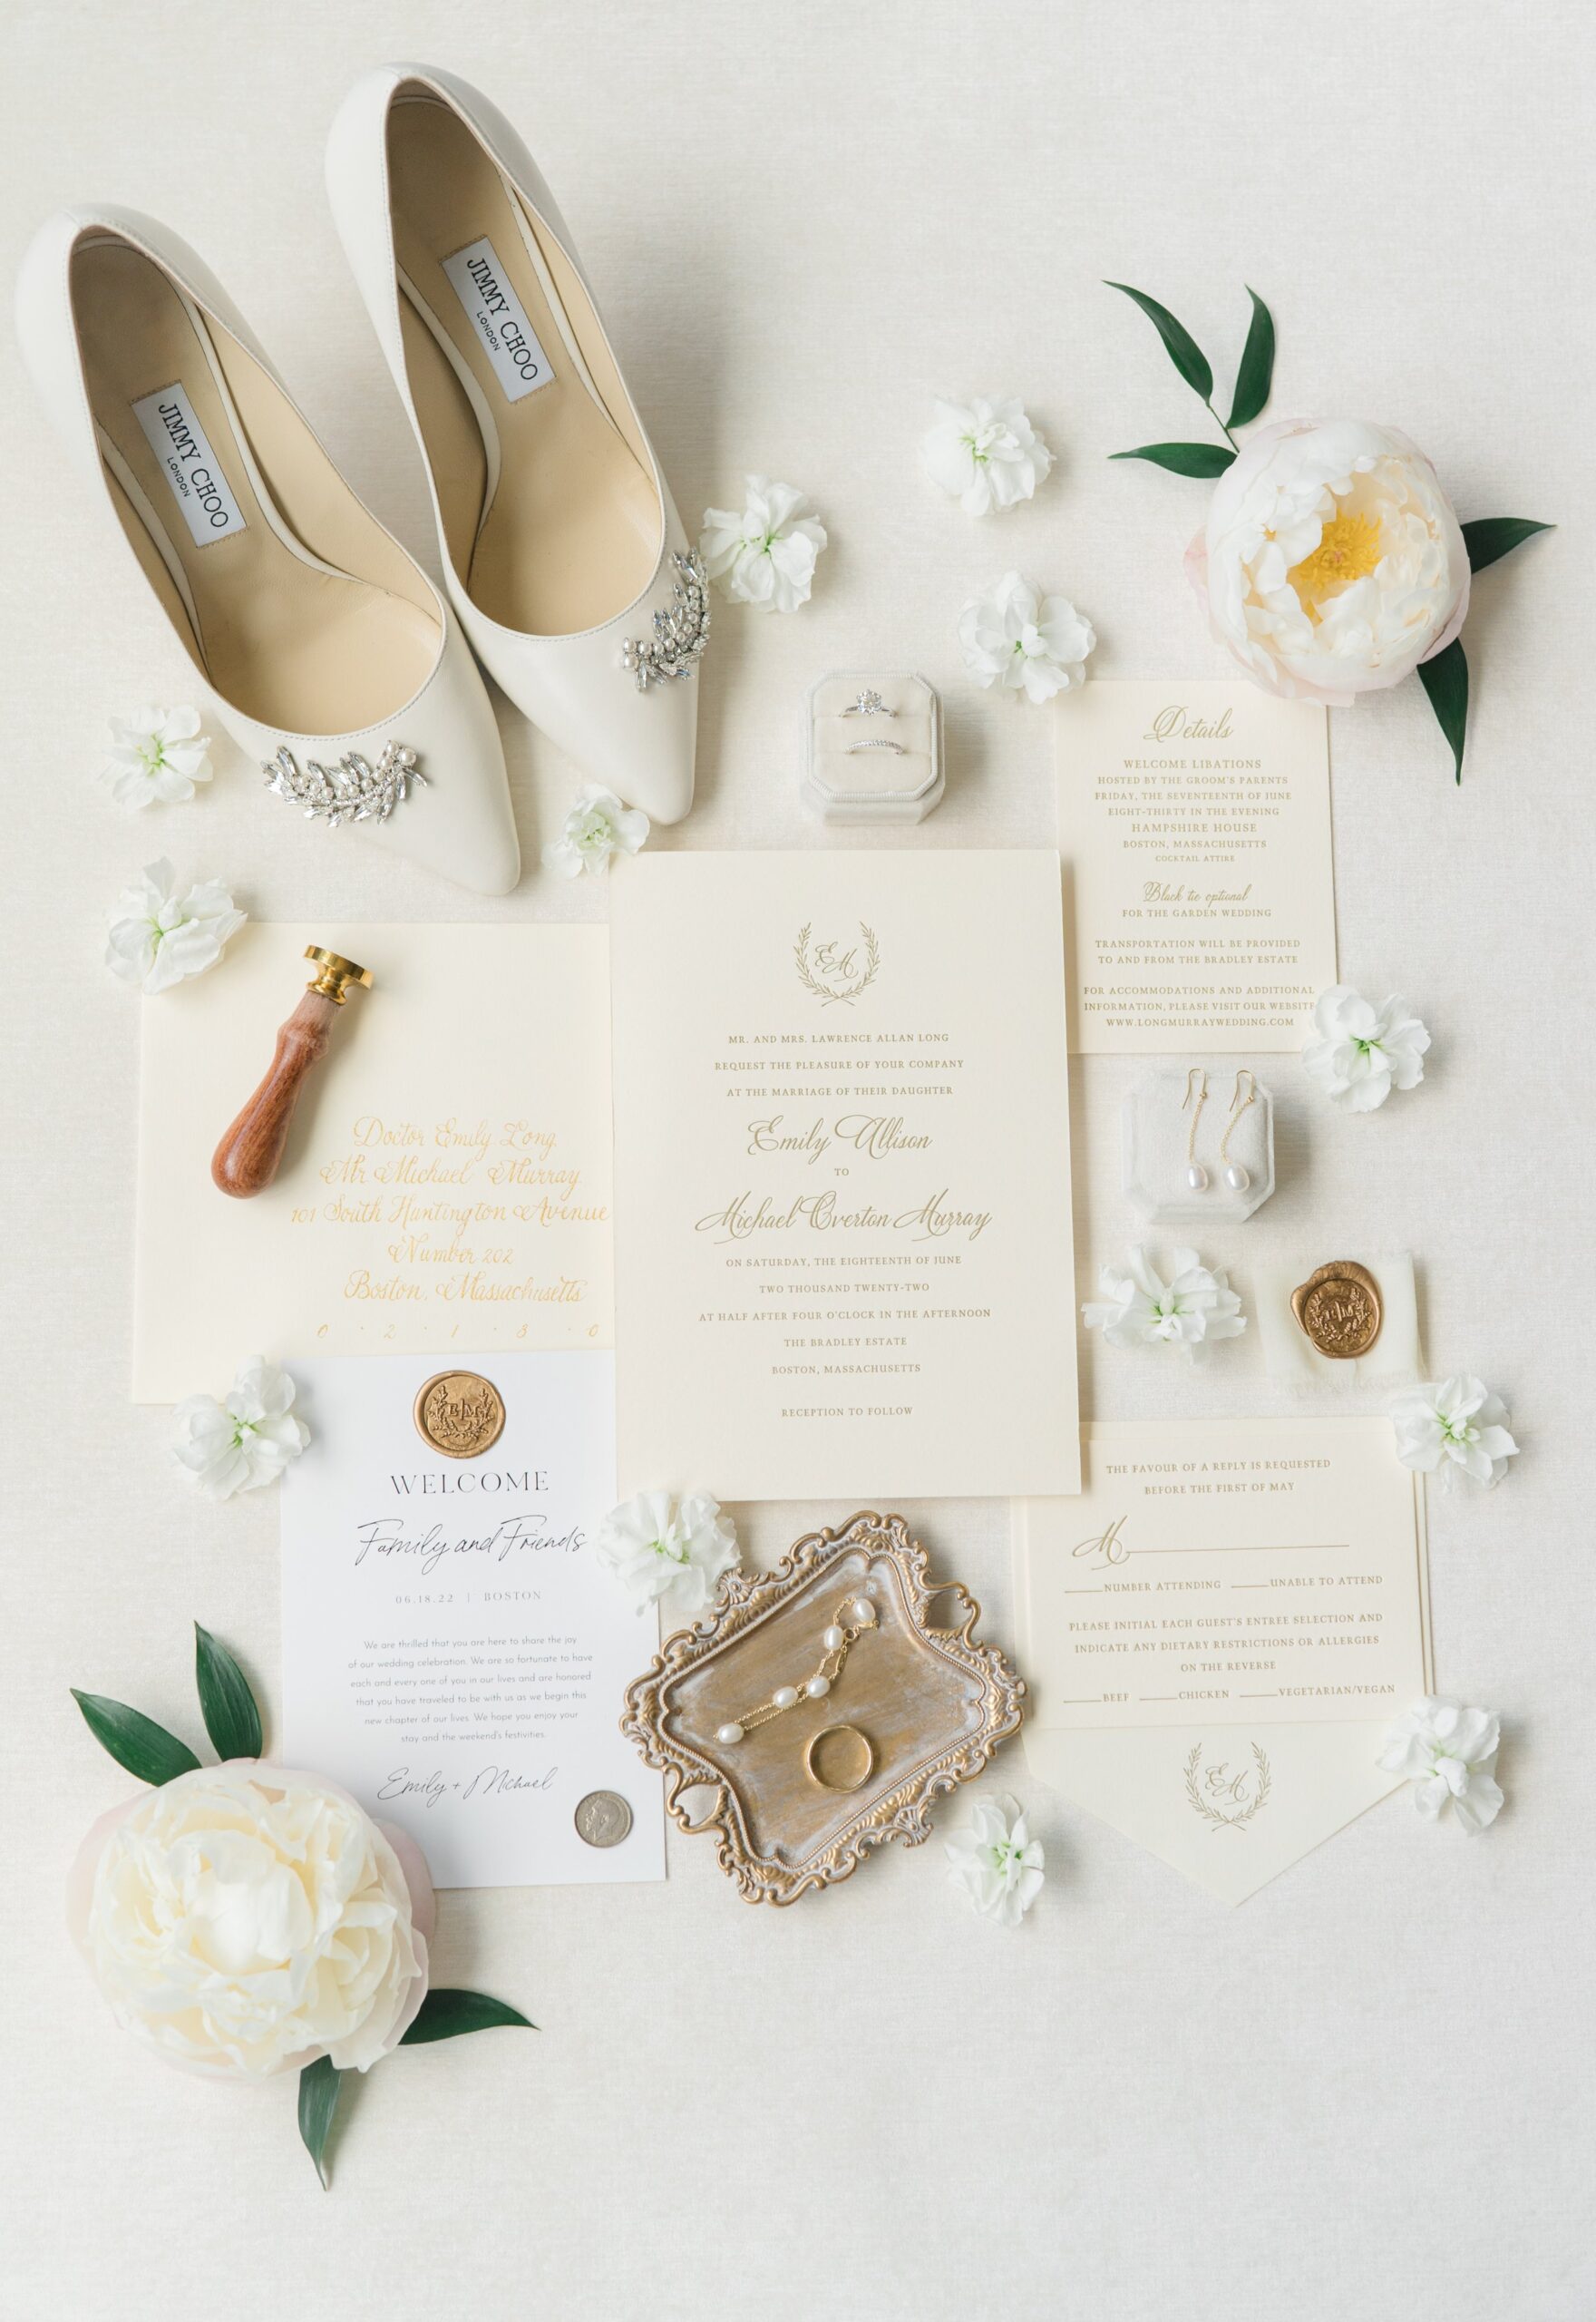 Full wedding invitation suite detail photo. Neutral tones with flowers, heels and engagement ring. Custom wax press. Getting ready at the Ritz Carlton in downtown Boston